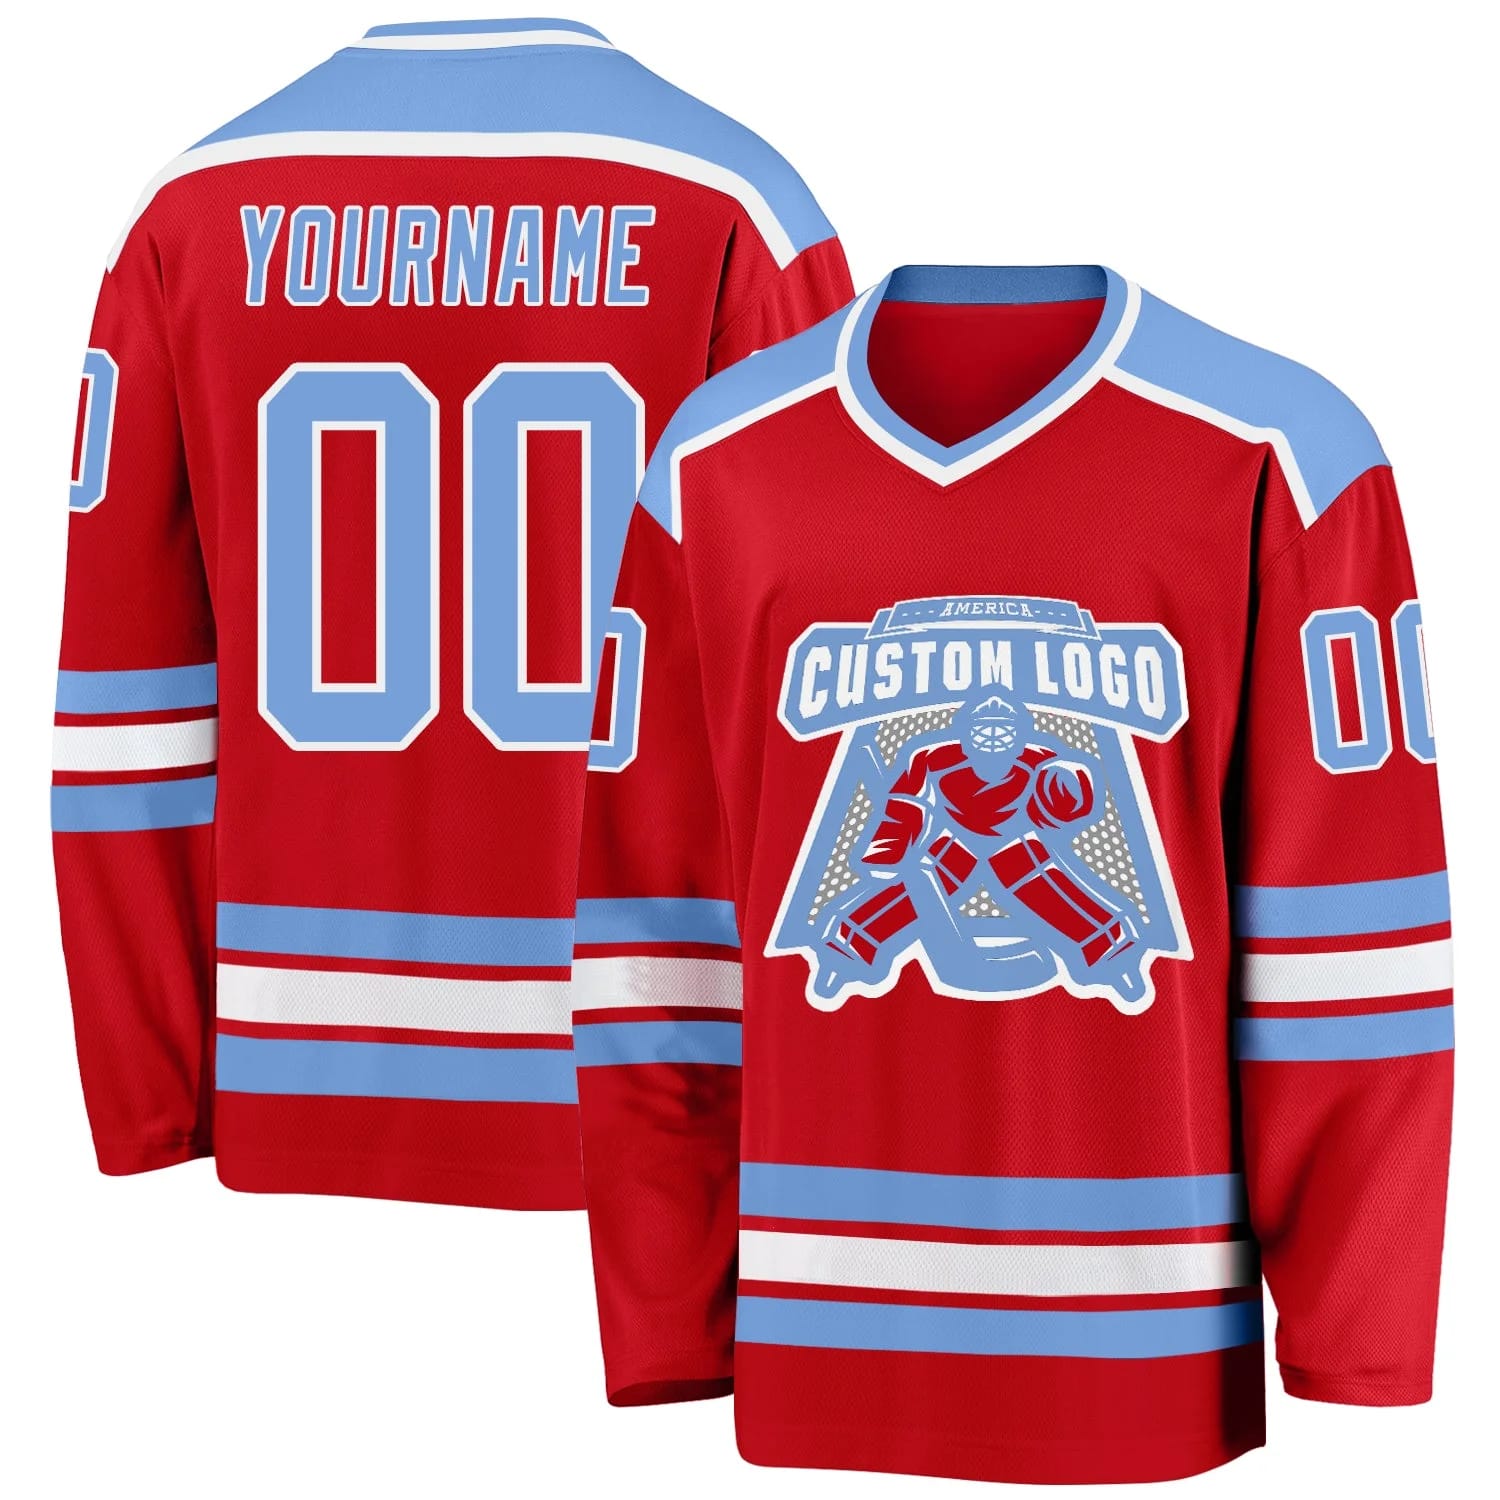 Stitched And Print Red Light Blue-white Hockey Jersey Custom